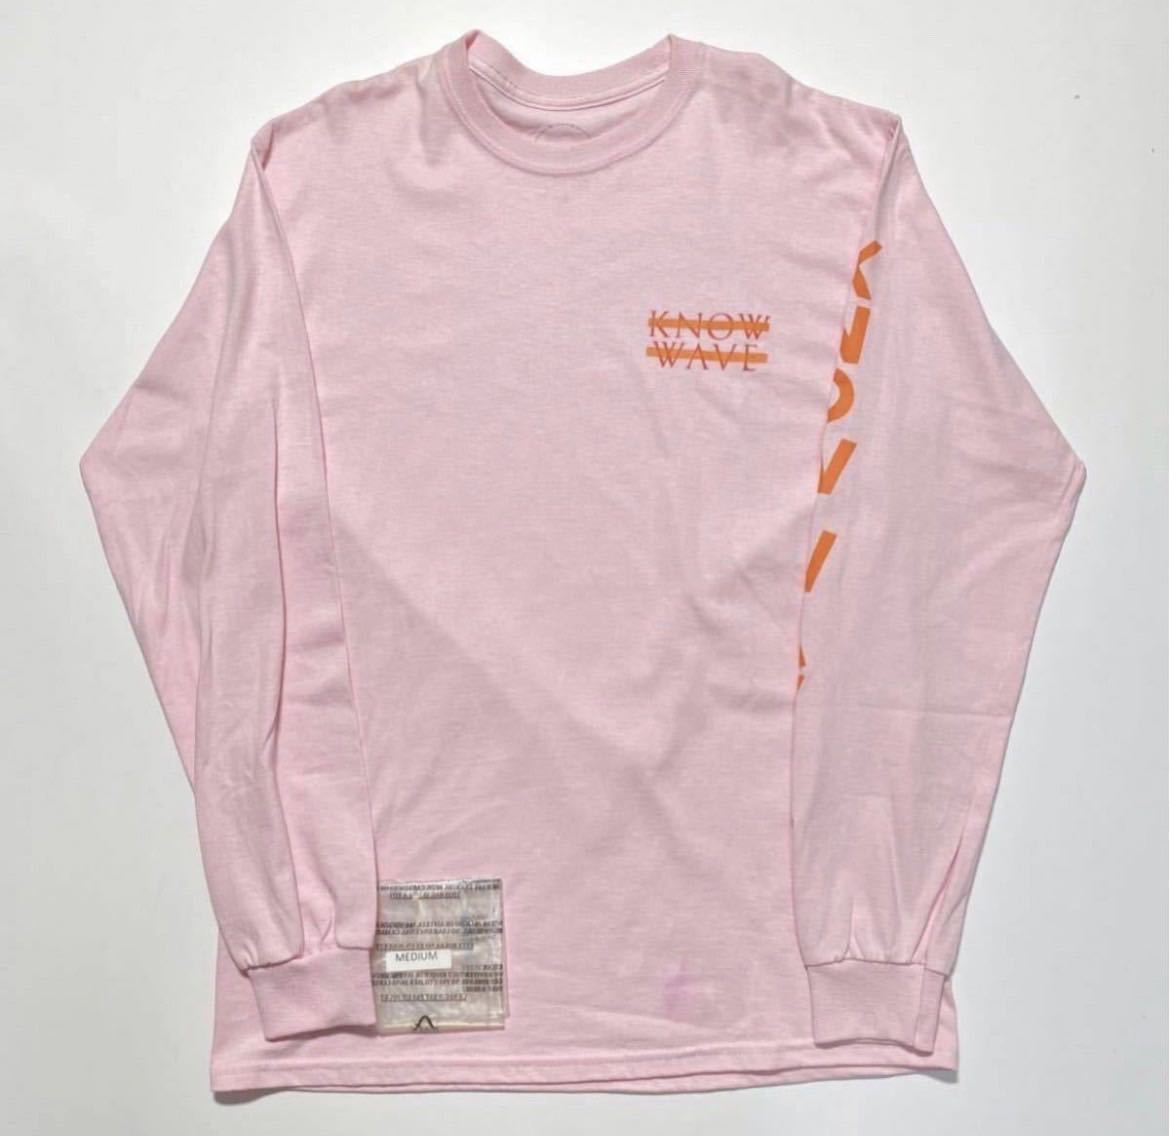 【M】KNOW WAVE ARM LOGO L/S Tee PINK ノーウェーブ アーム ロゴ ロングスリーブ Tシャツ ピンク ロンT 長袖Tシャツ Y739